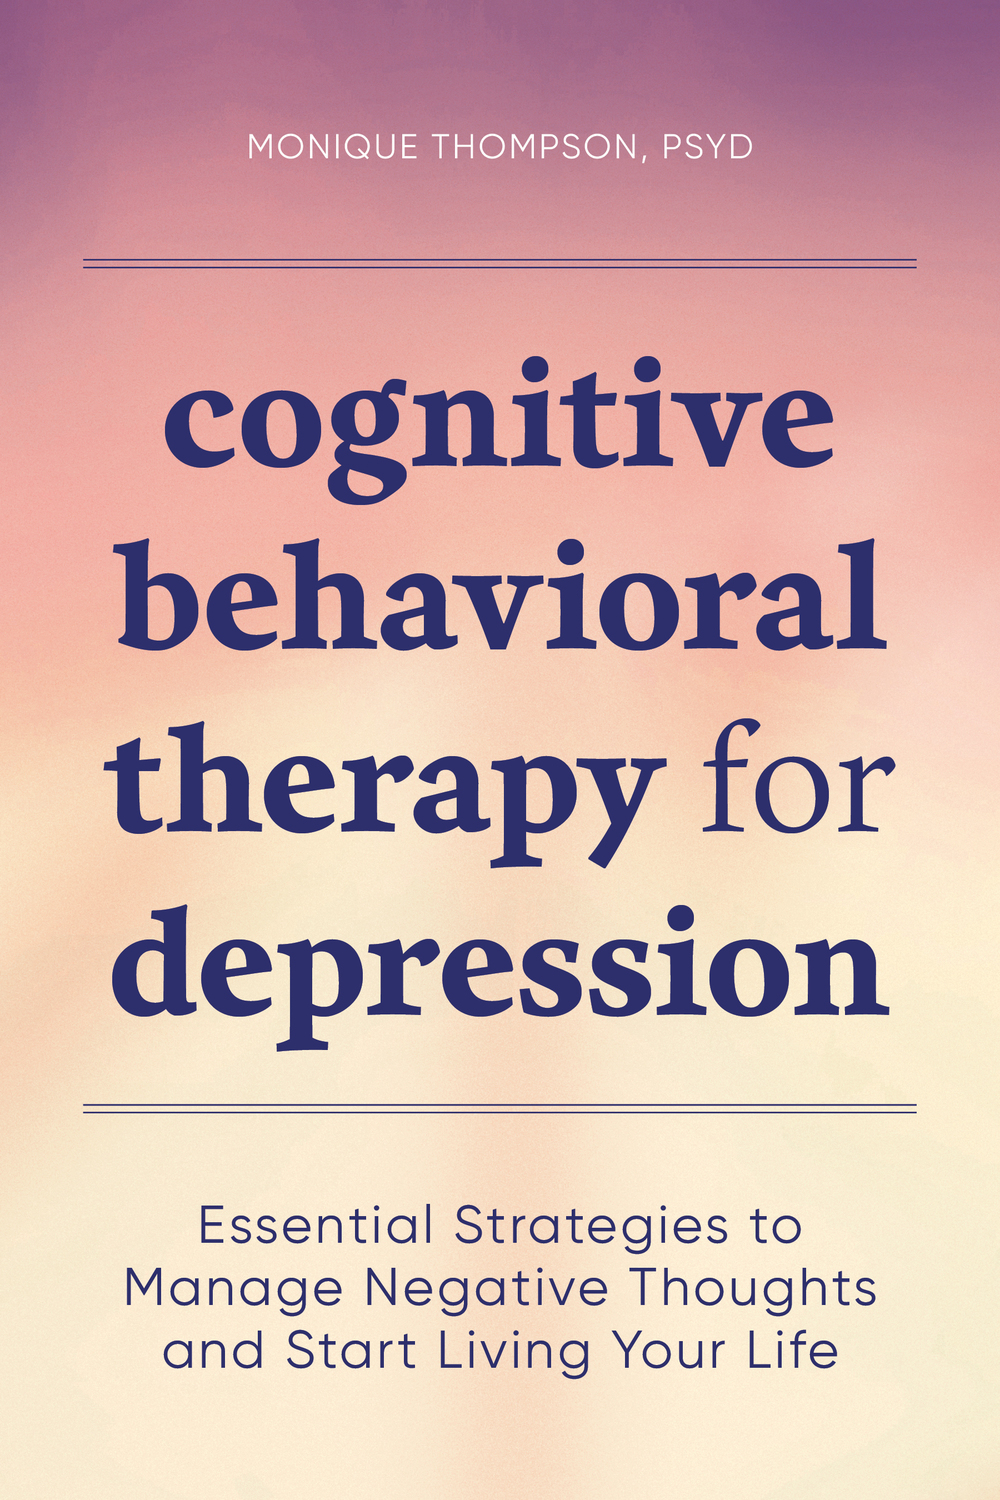 Gallery Photo of CBT for Depression: Essential Strategies to Manage Negative Thoughts and Start Living Life